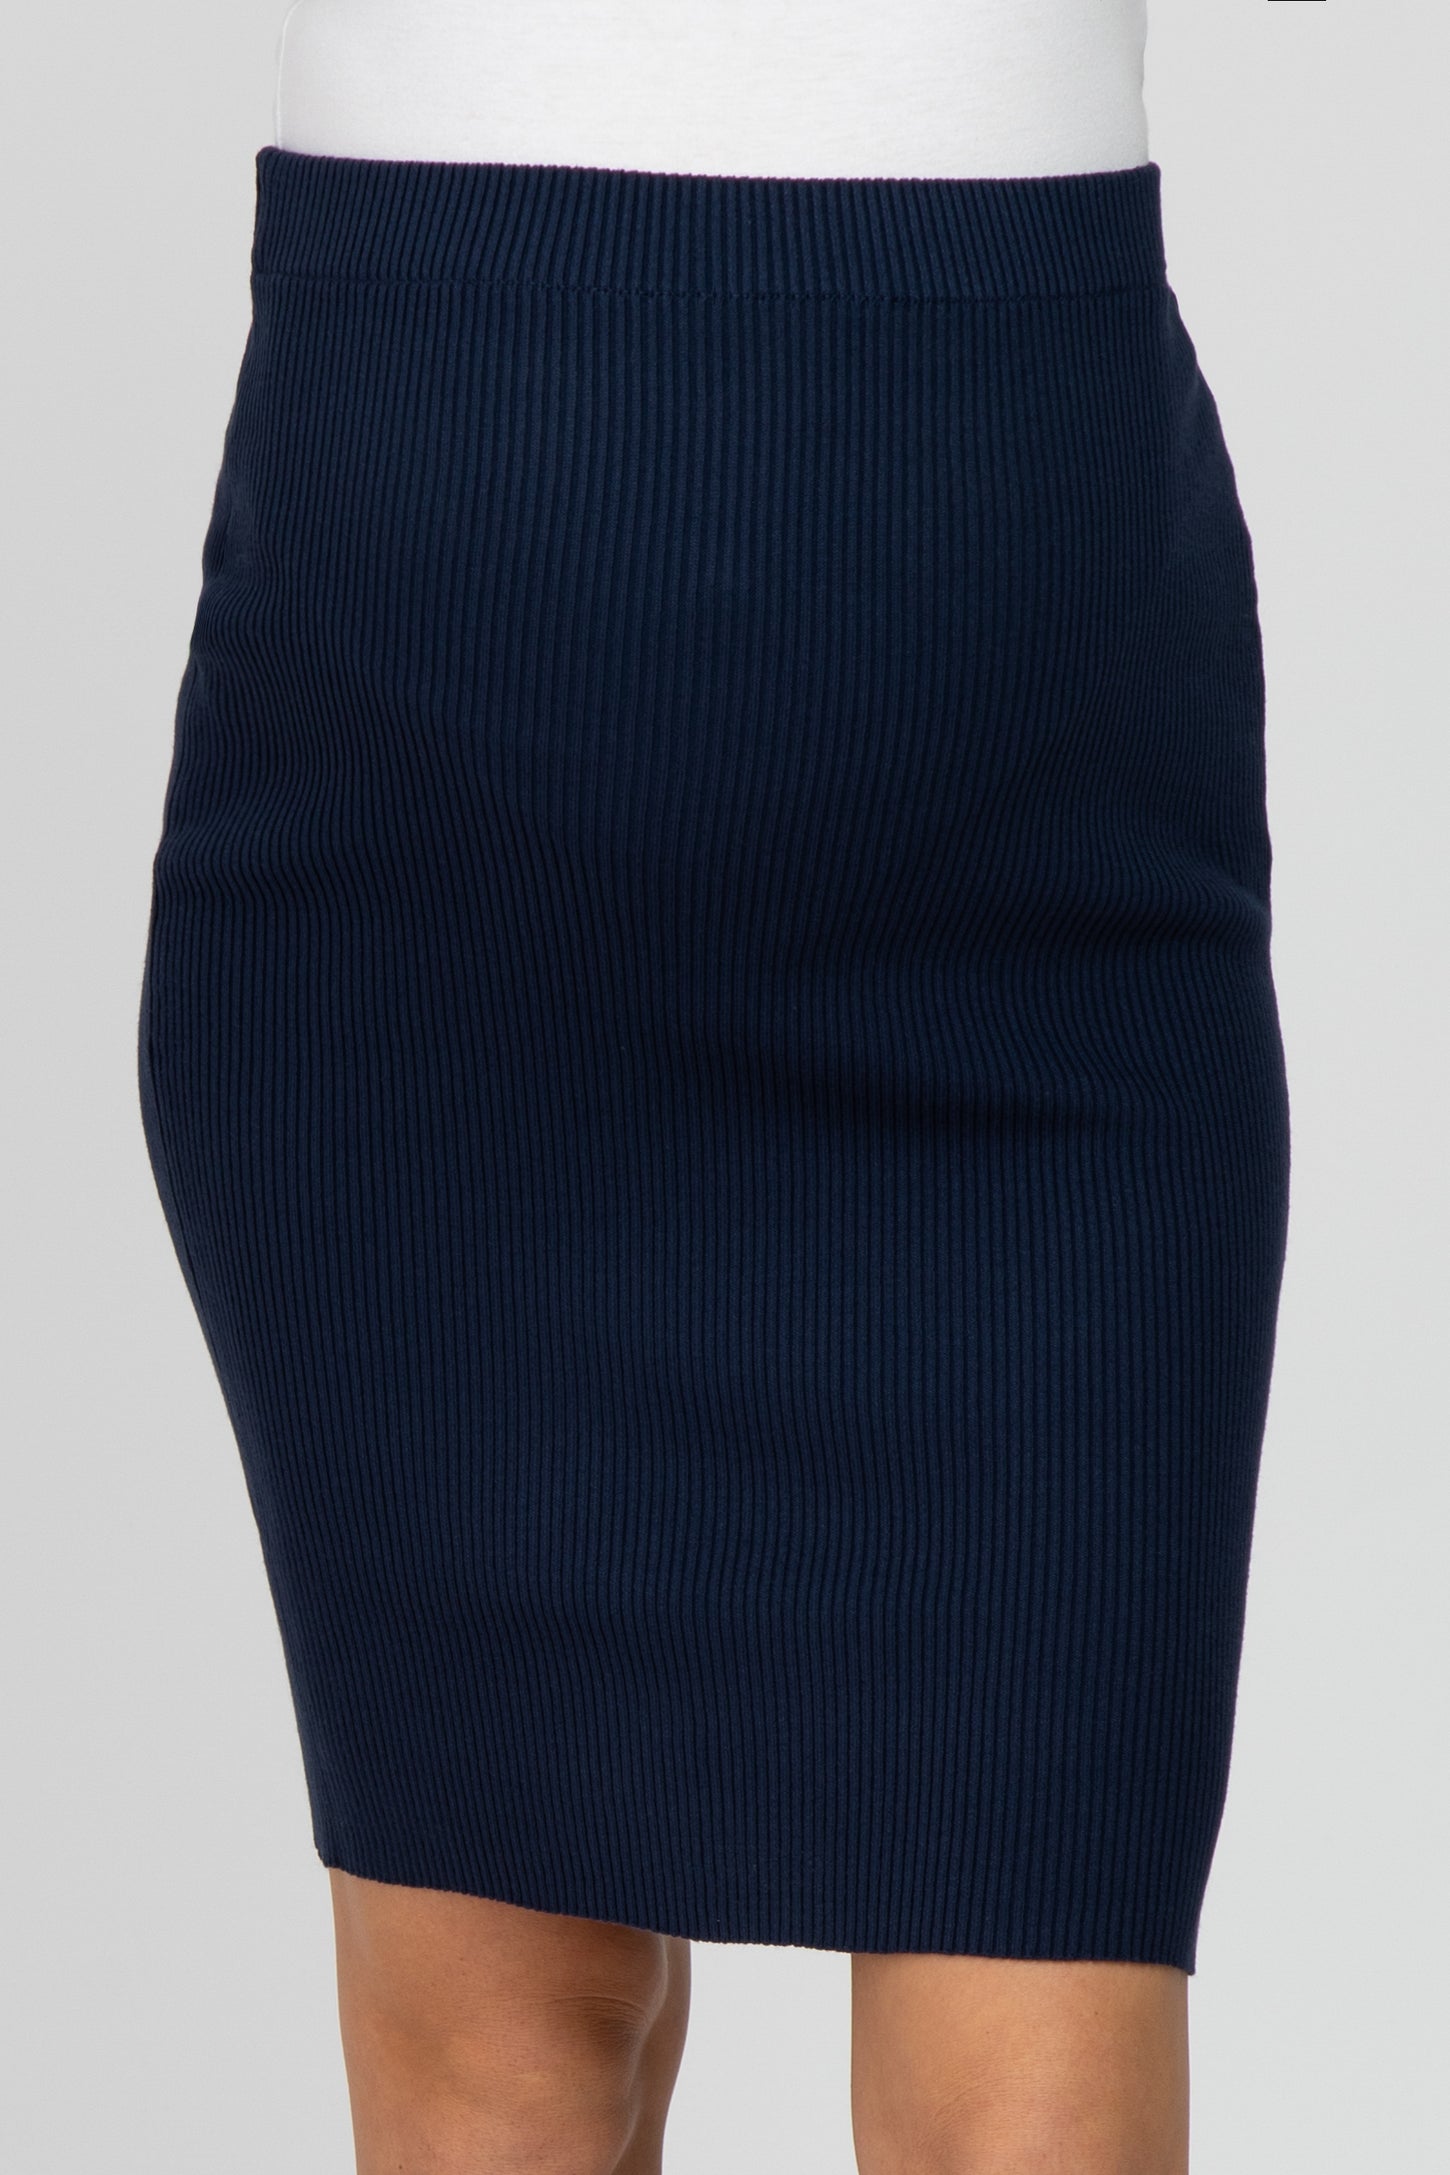 Navy Knit Fitted Maternity Skirt